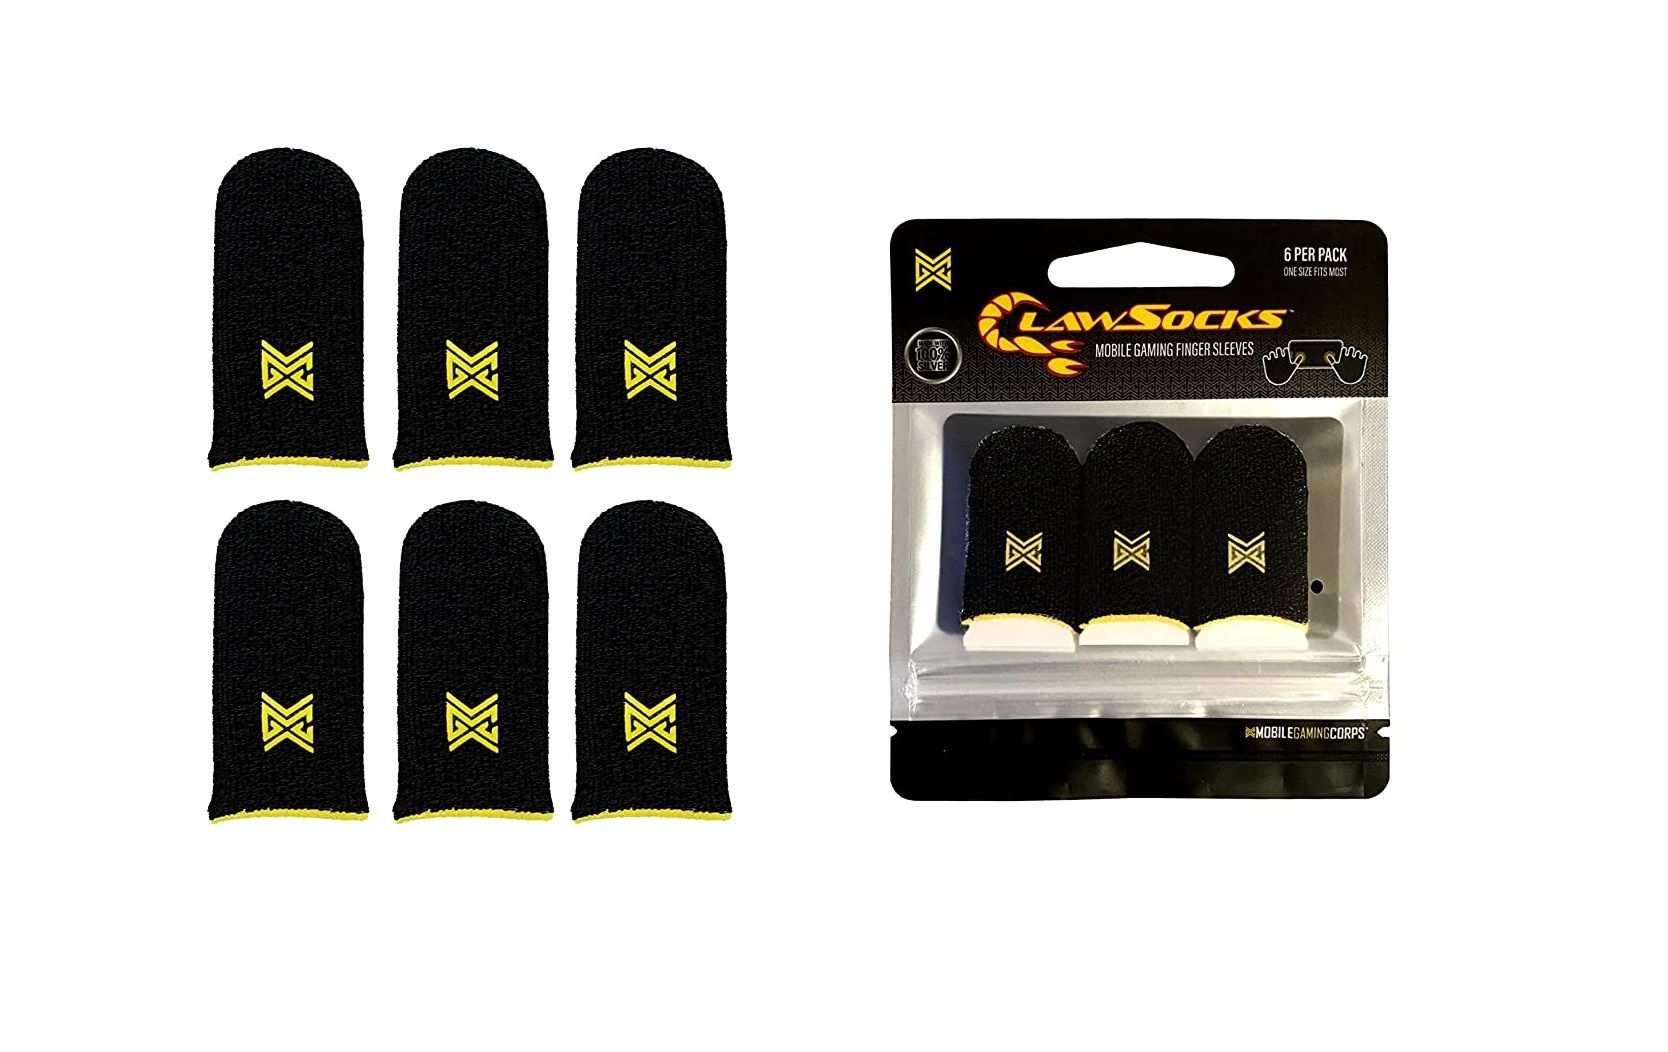 mgc clawsocks finger sleeves and packaging